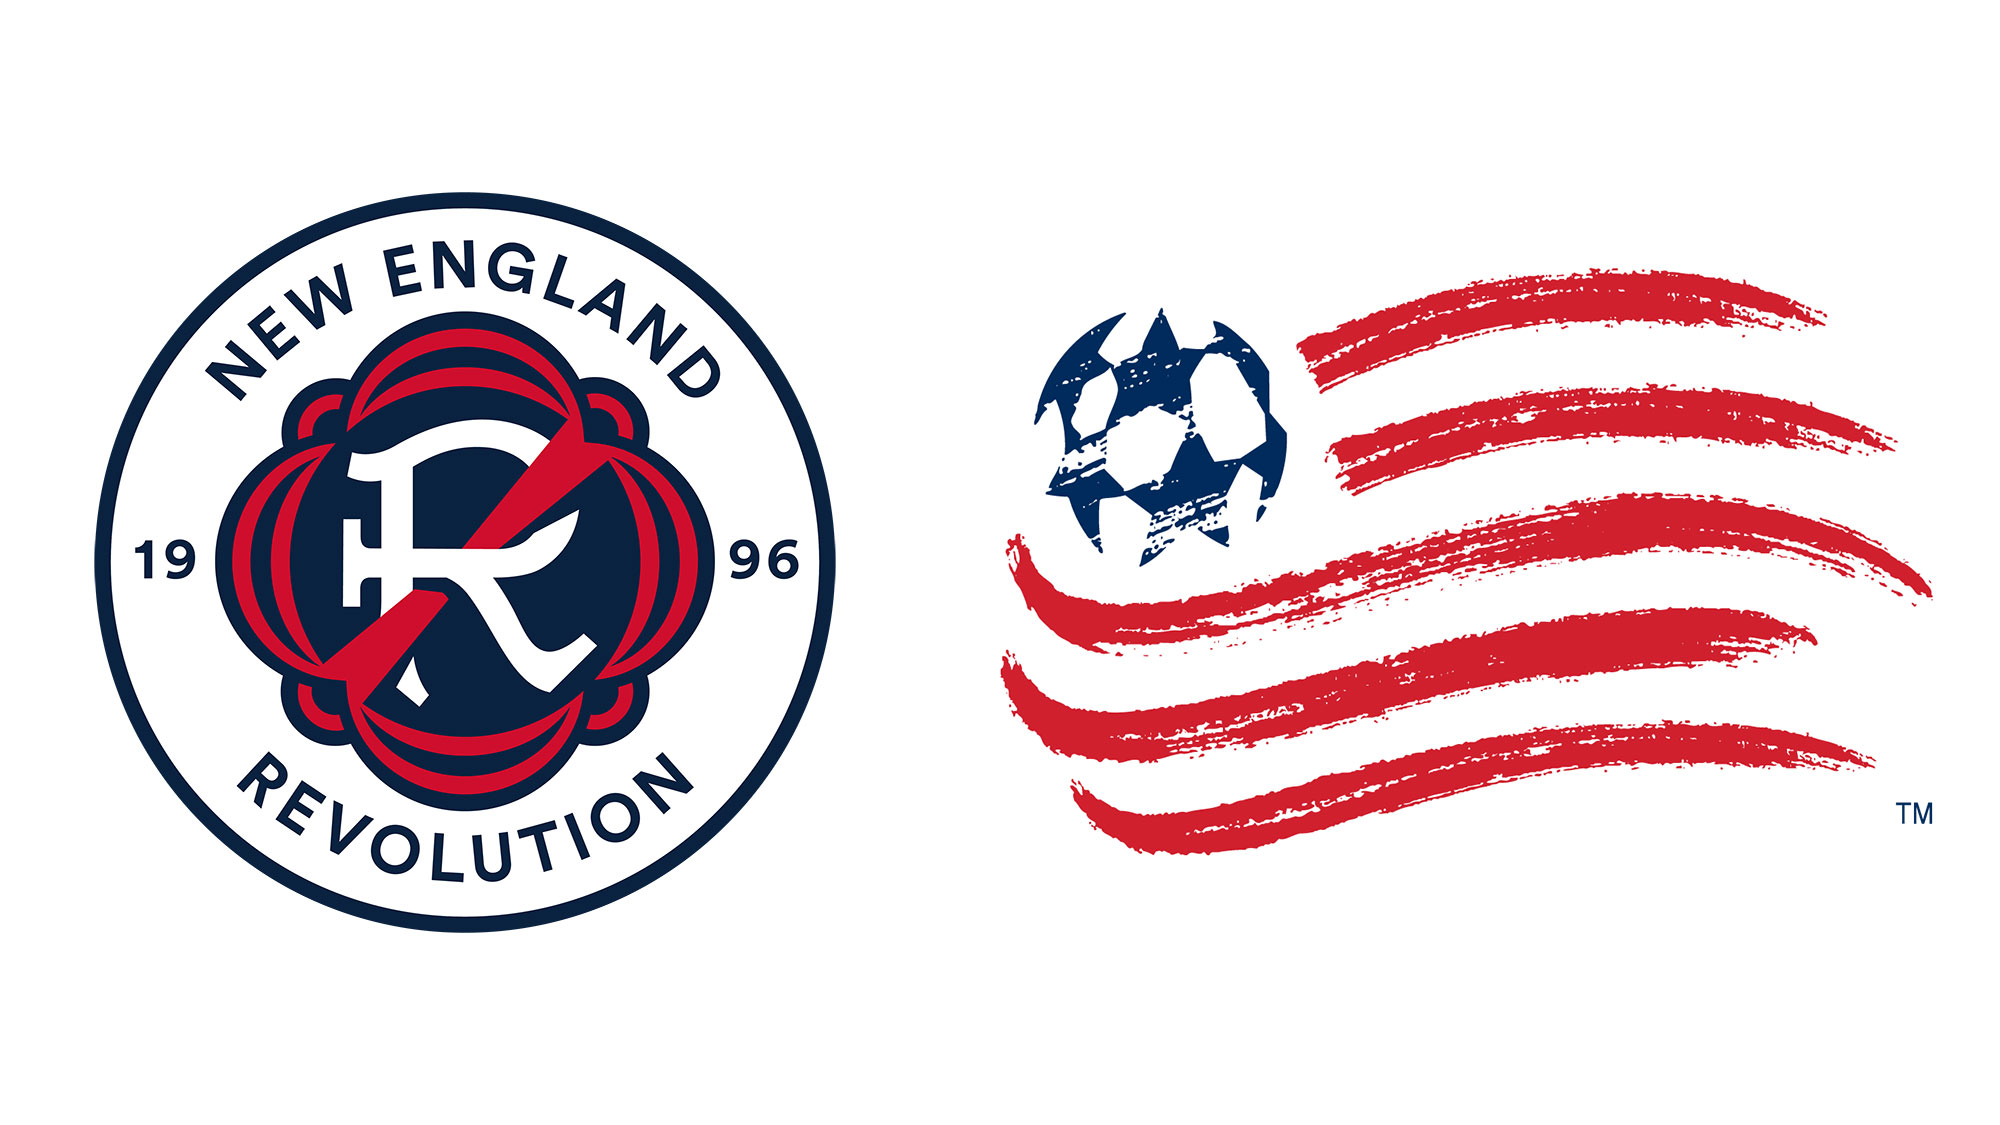 The New England Revolution is changing its logo